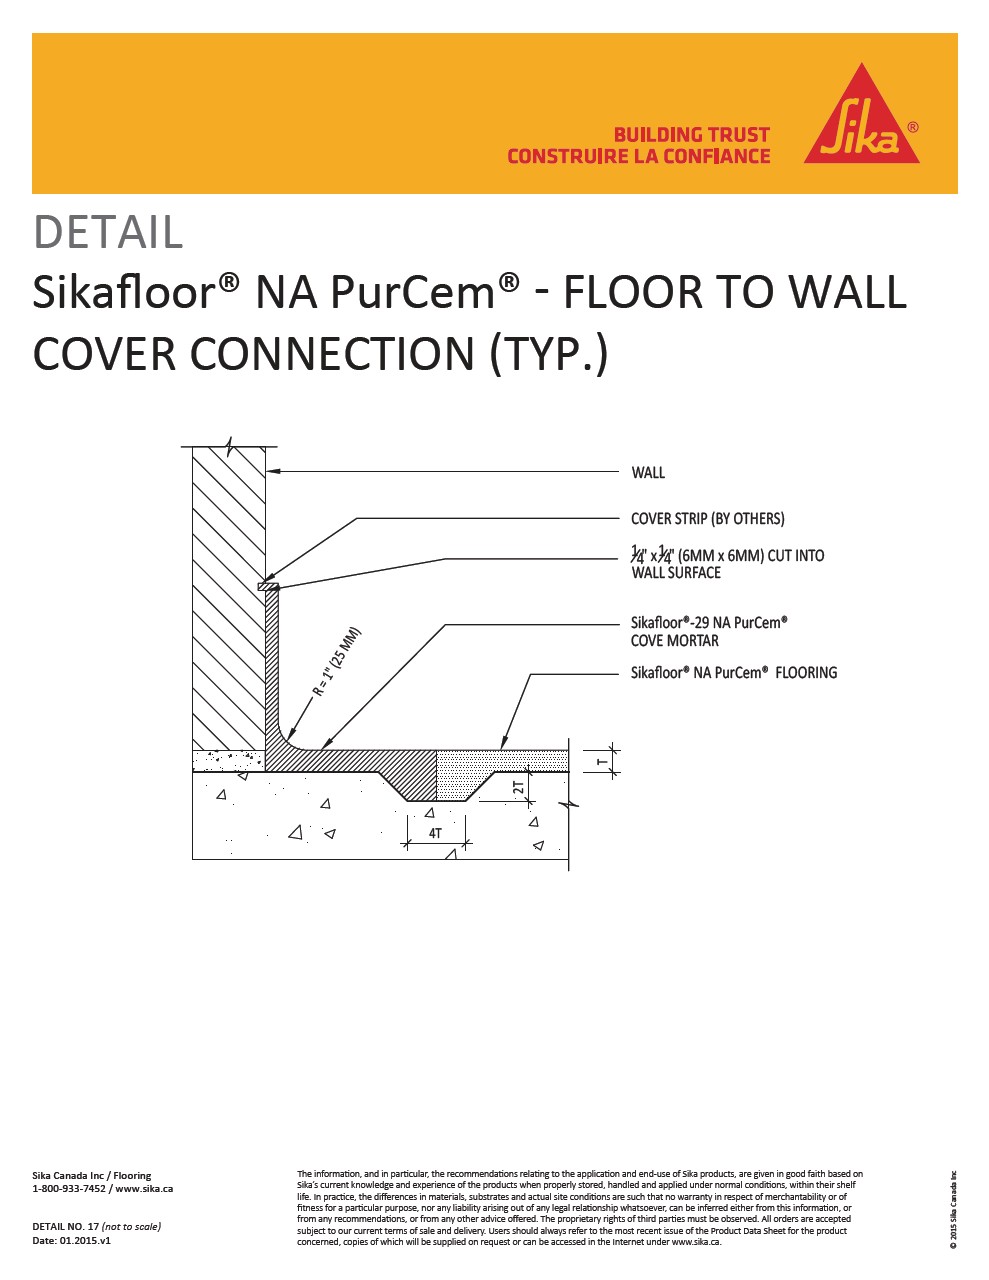  17-Sikafloor NA PurCem-Floor to Wall Cover Connection 